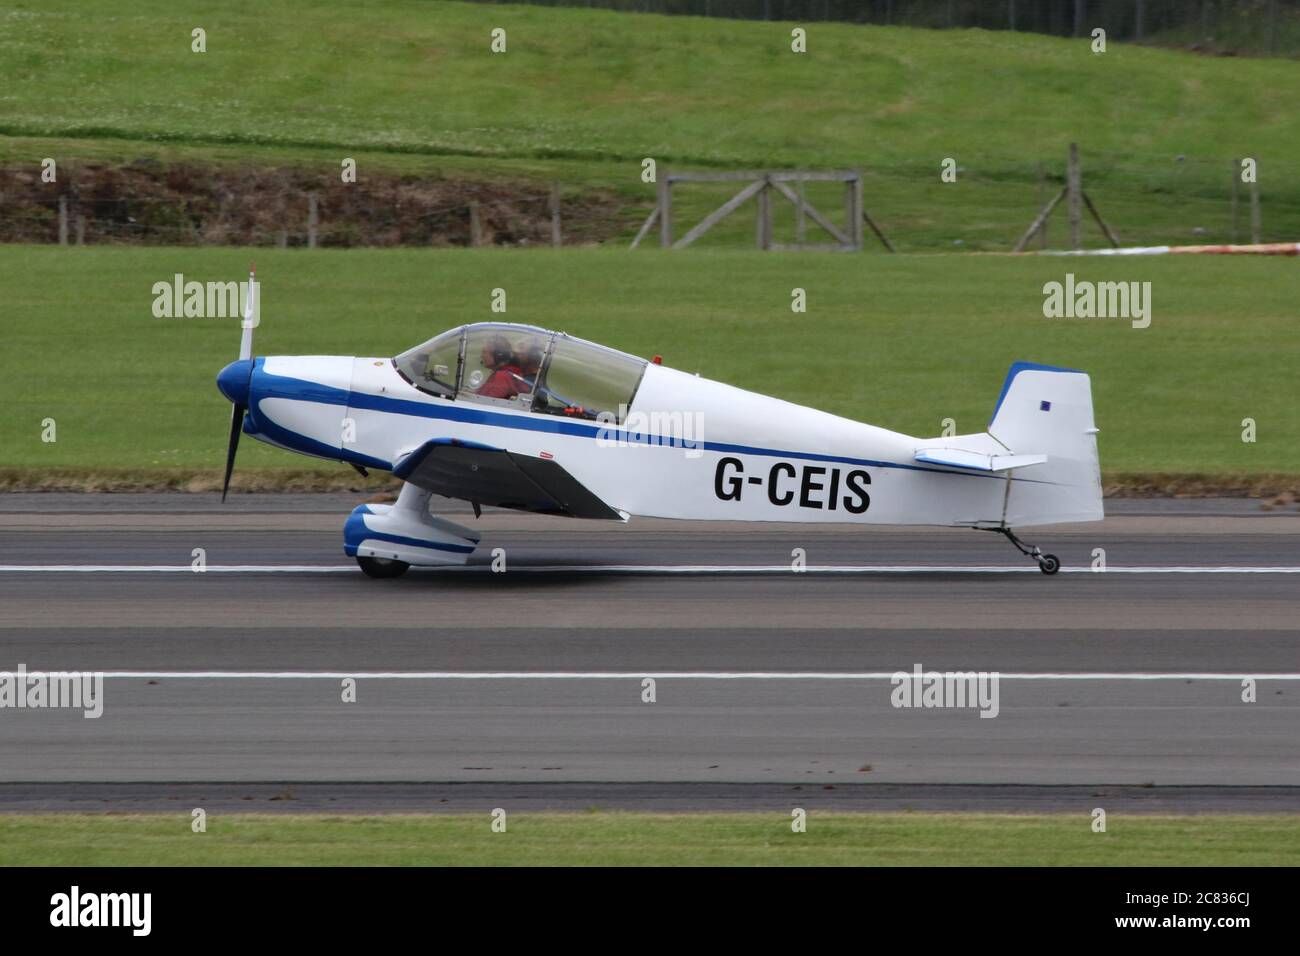 G-CEIS, a privately owned Jodel DR.1050 Ambassadeur, at Prestwick Airport in Ayrshire. Stock Photo